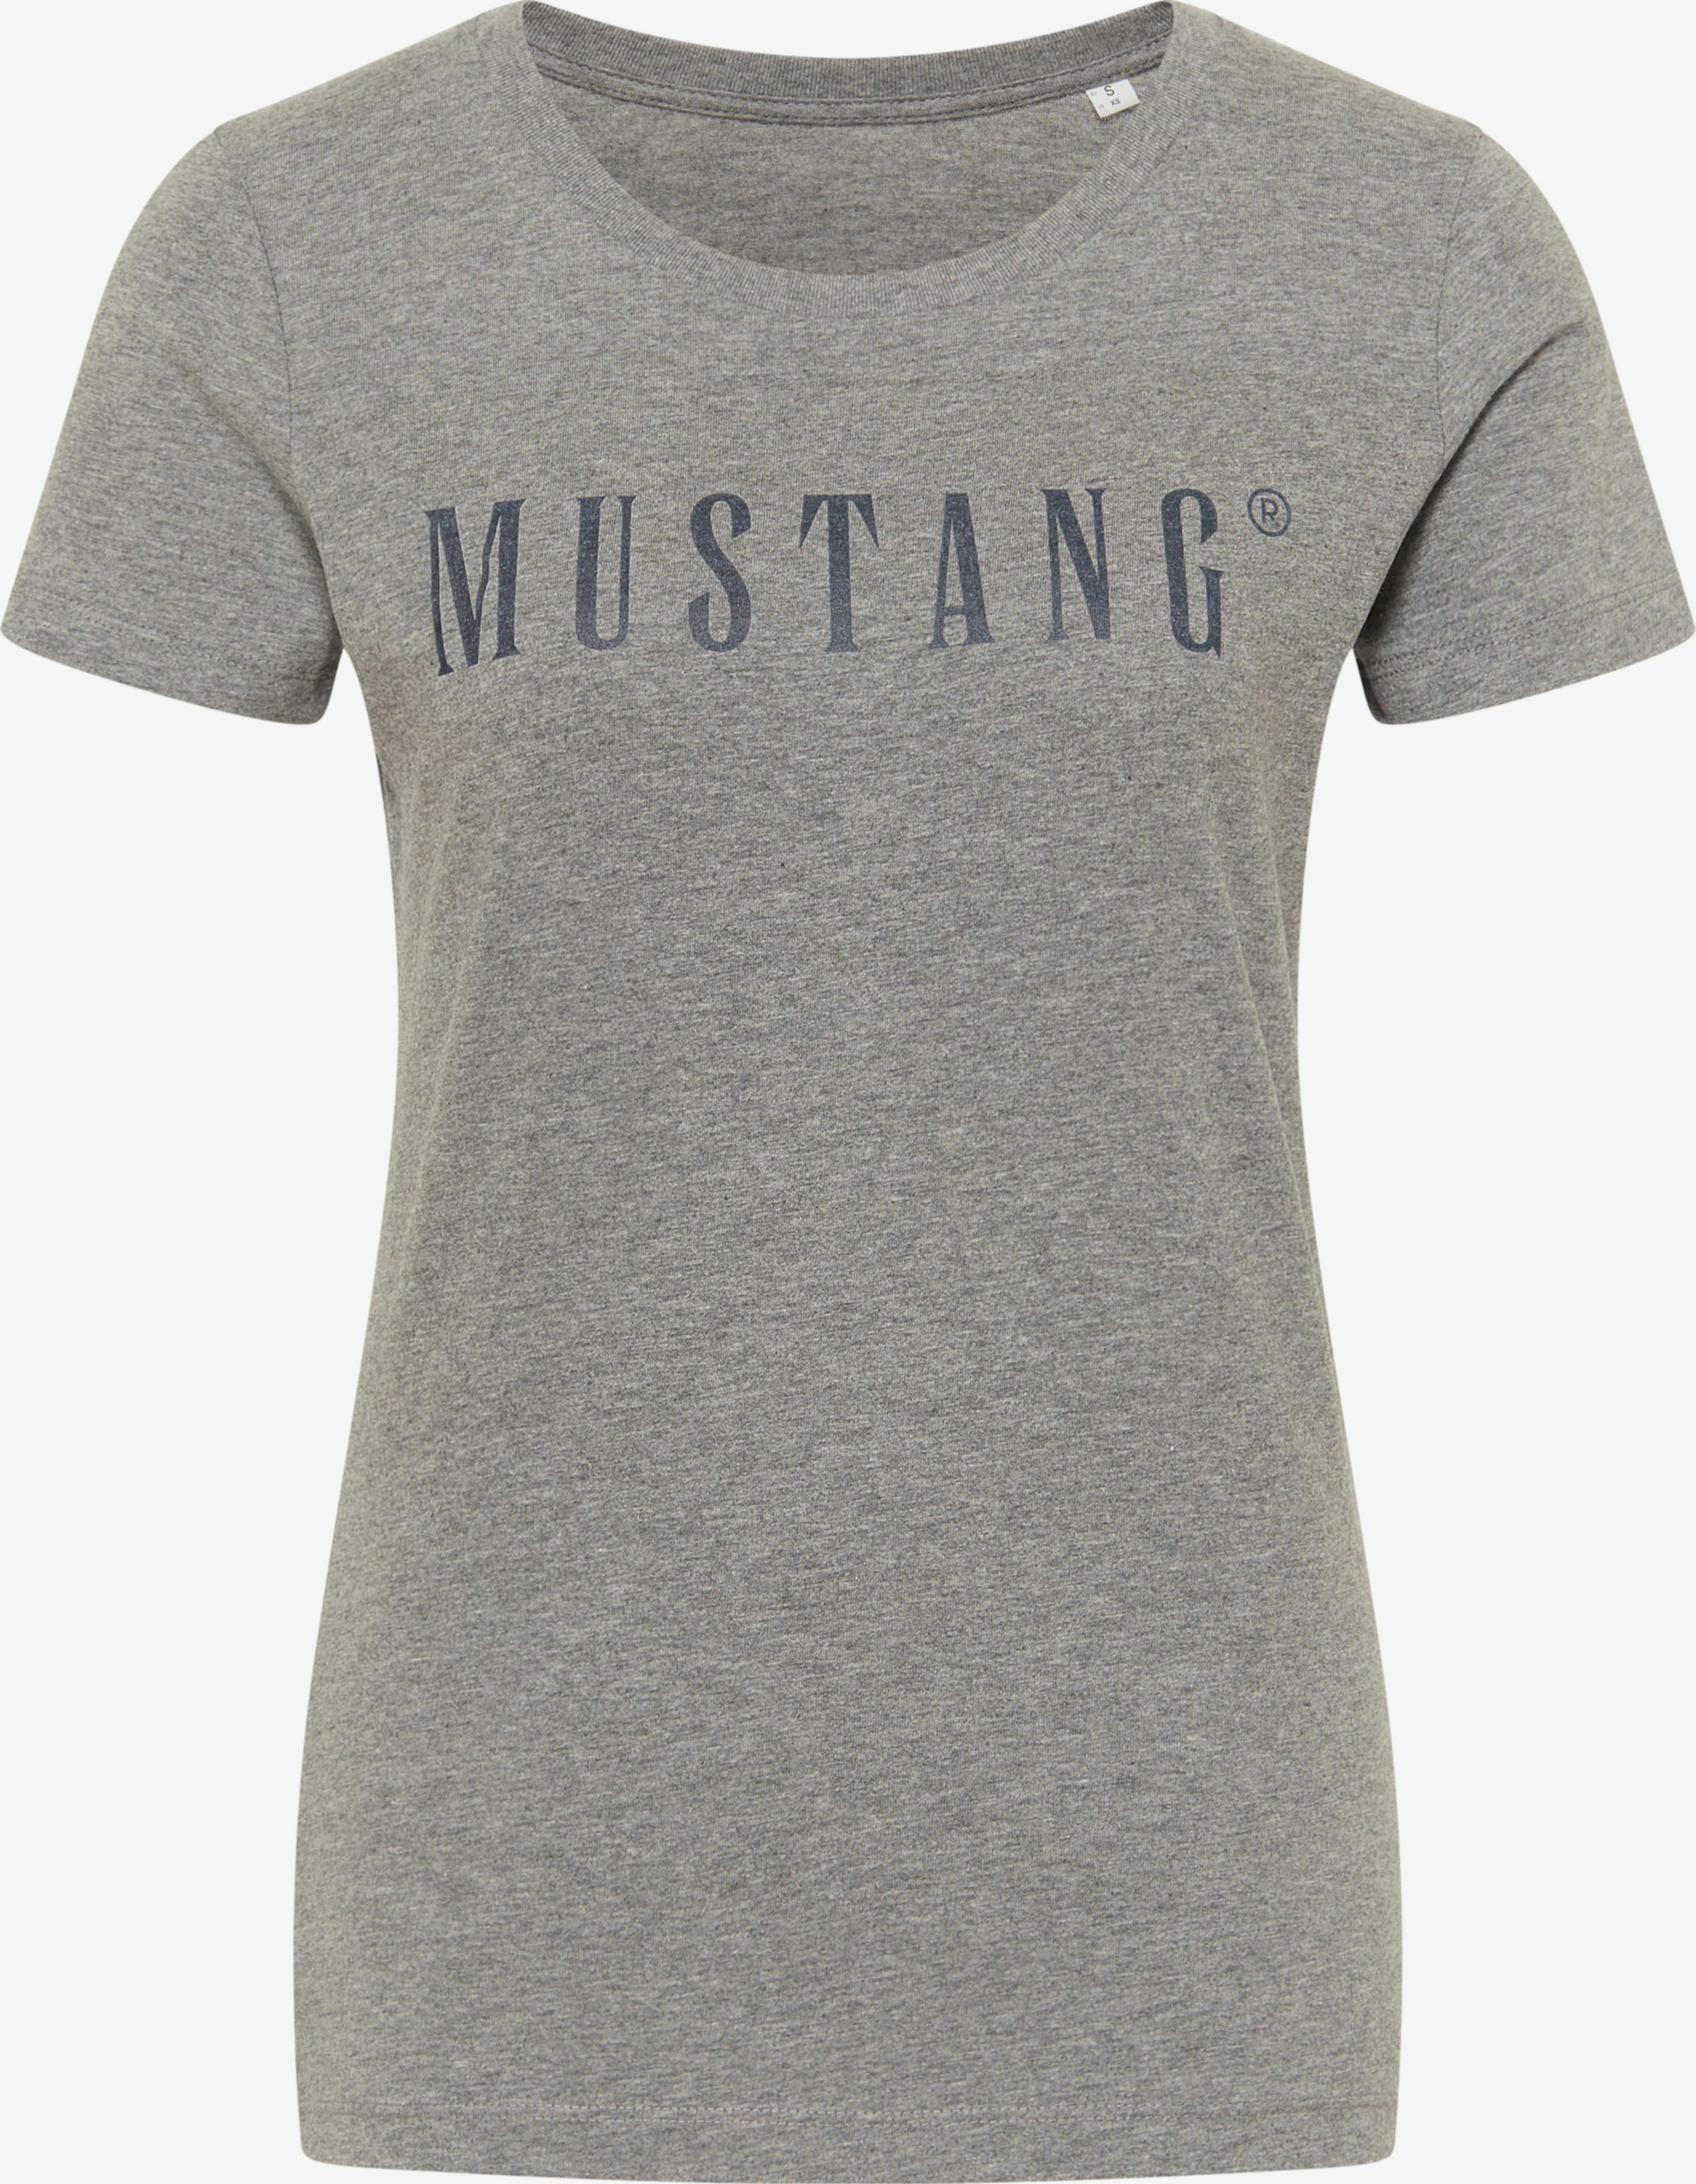 MUSTANG T-Shirt in Dunkelgrau, Graumeliert | ABOUT YOU